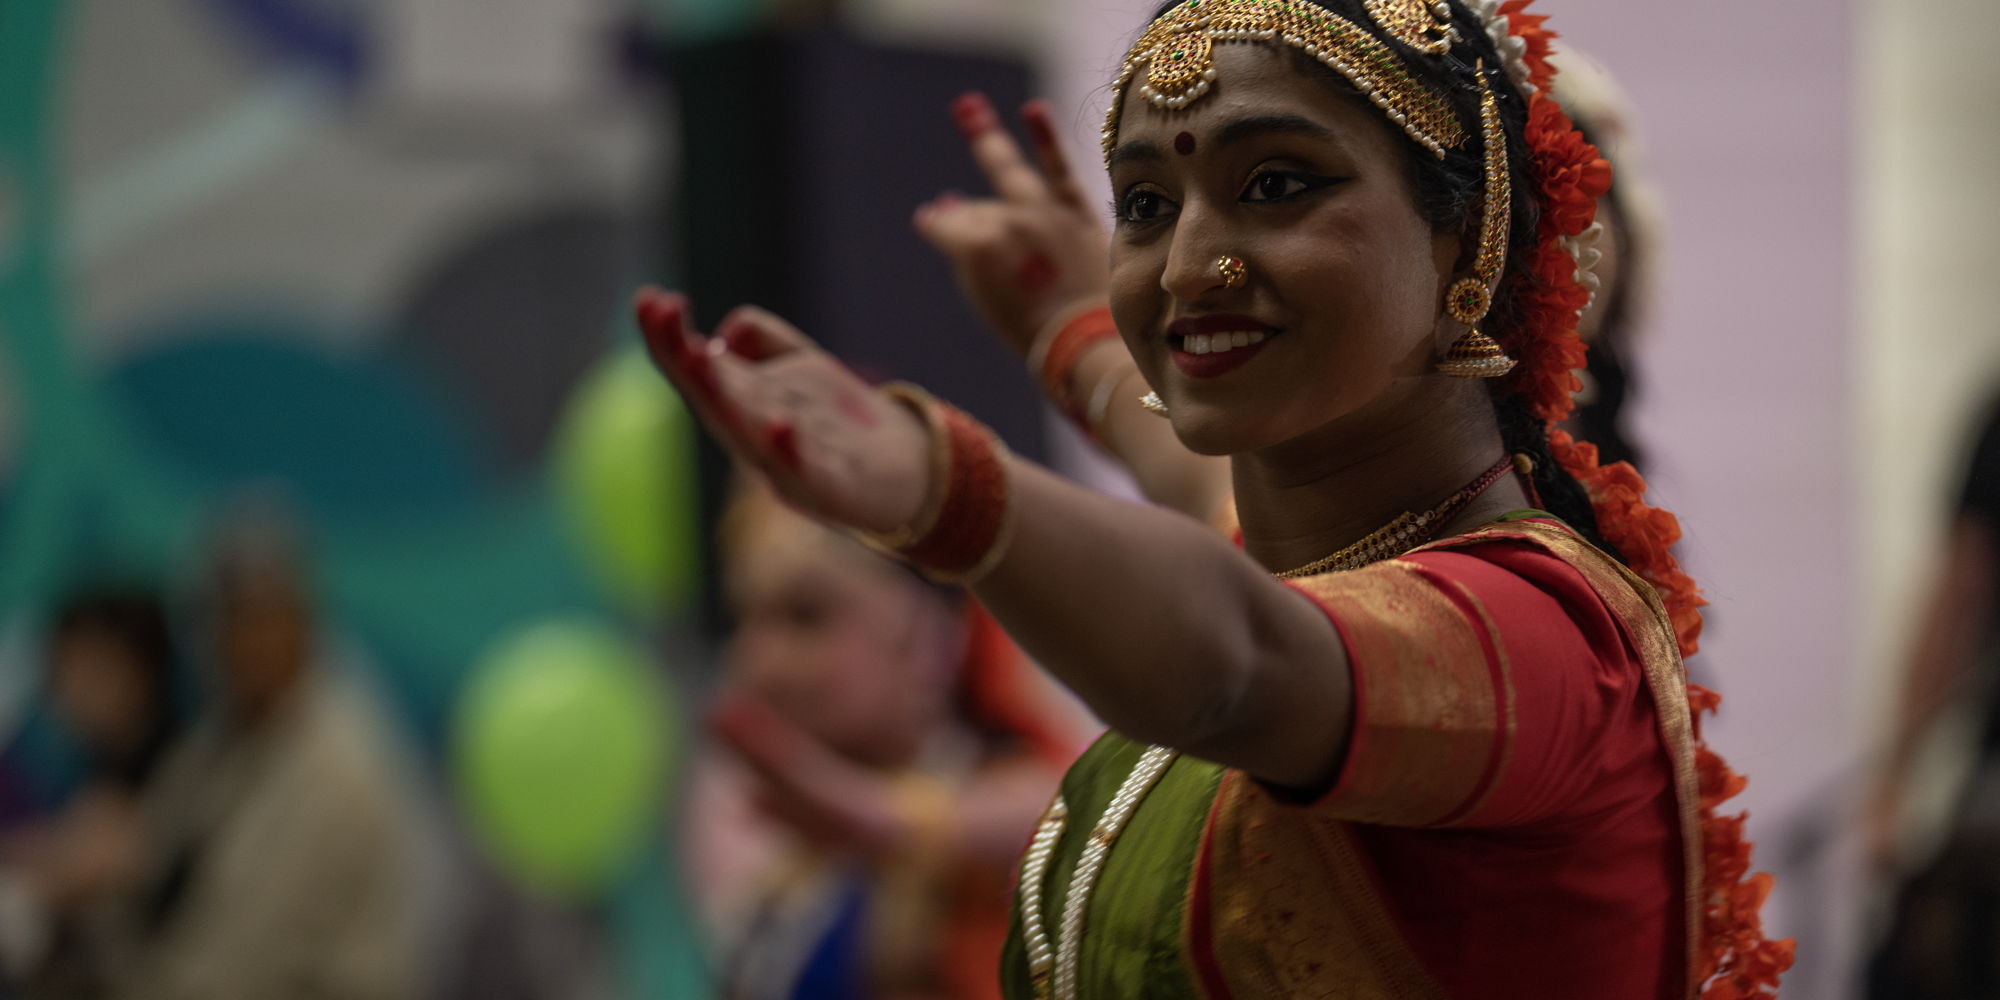 Southern Accents: Dances of India Workshop promotional image